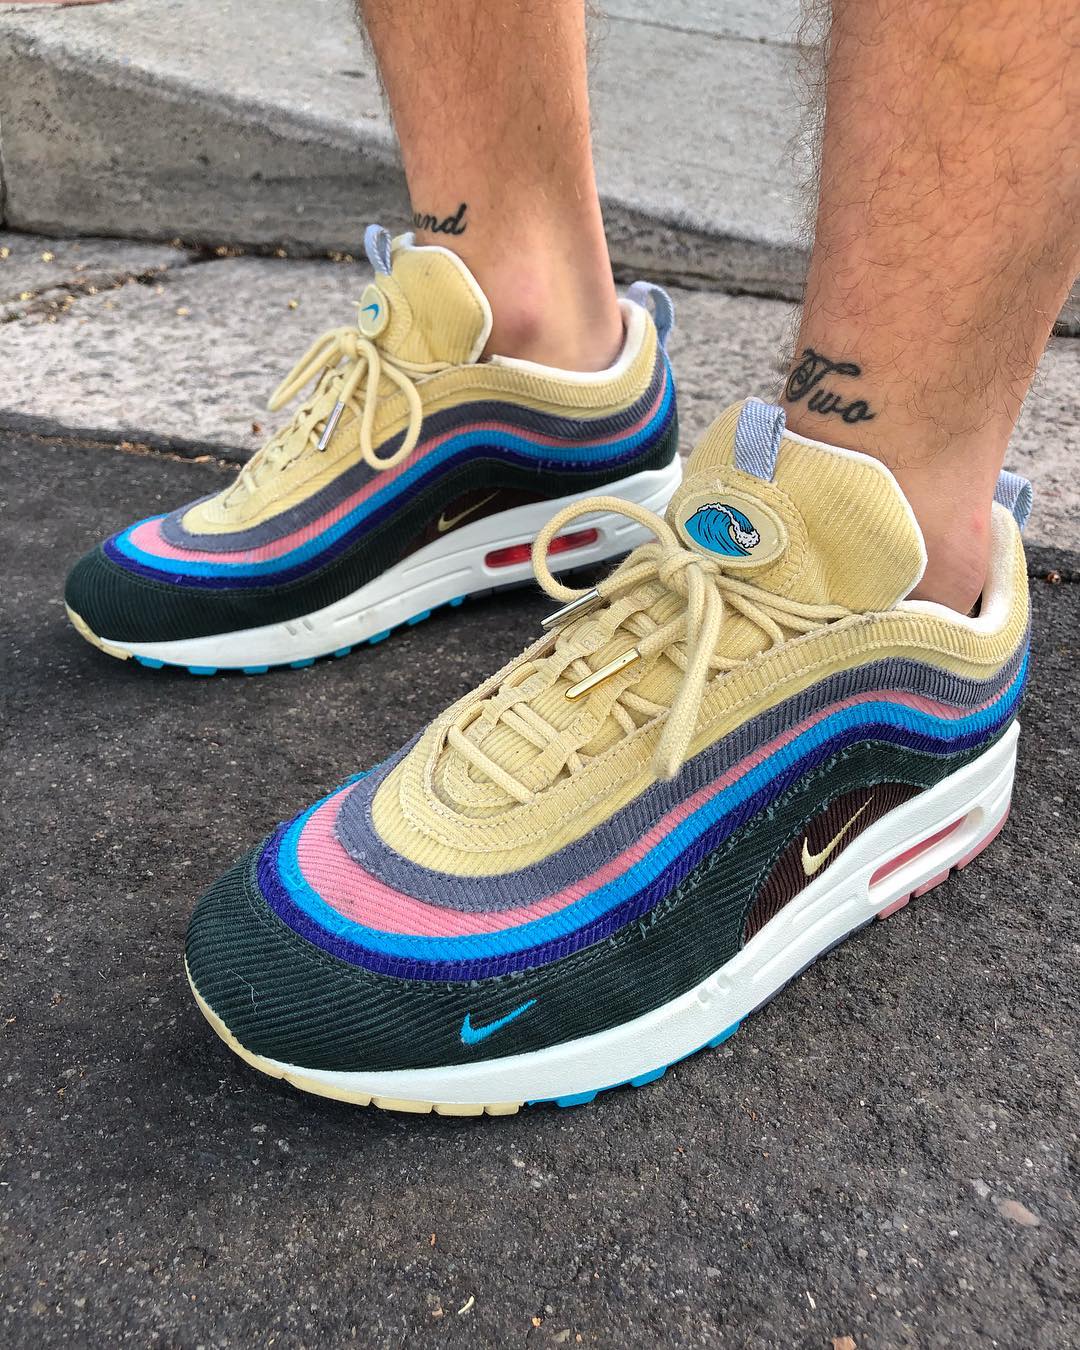 Nike x Sean Witherspoon Air Max 97